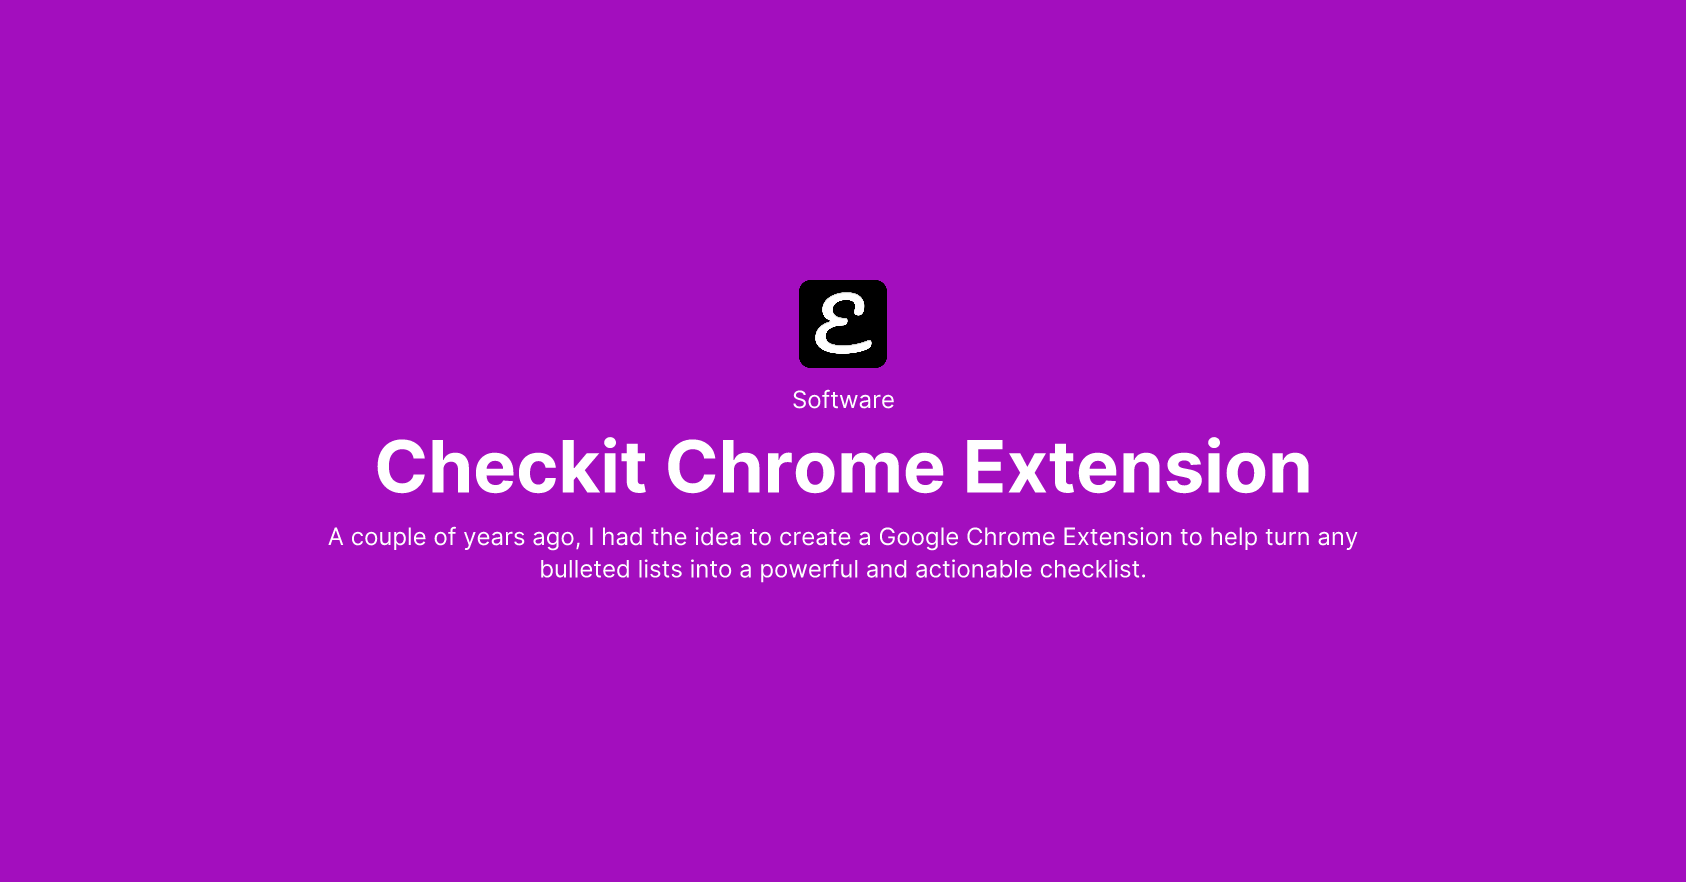 Checkit Chrome Extension by Eric David Smith